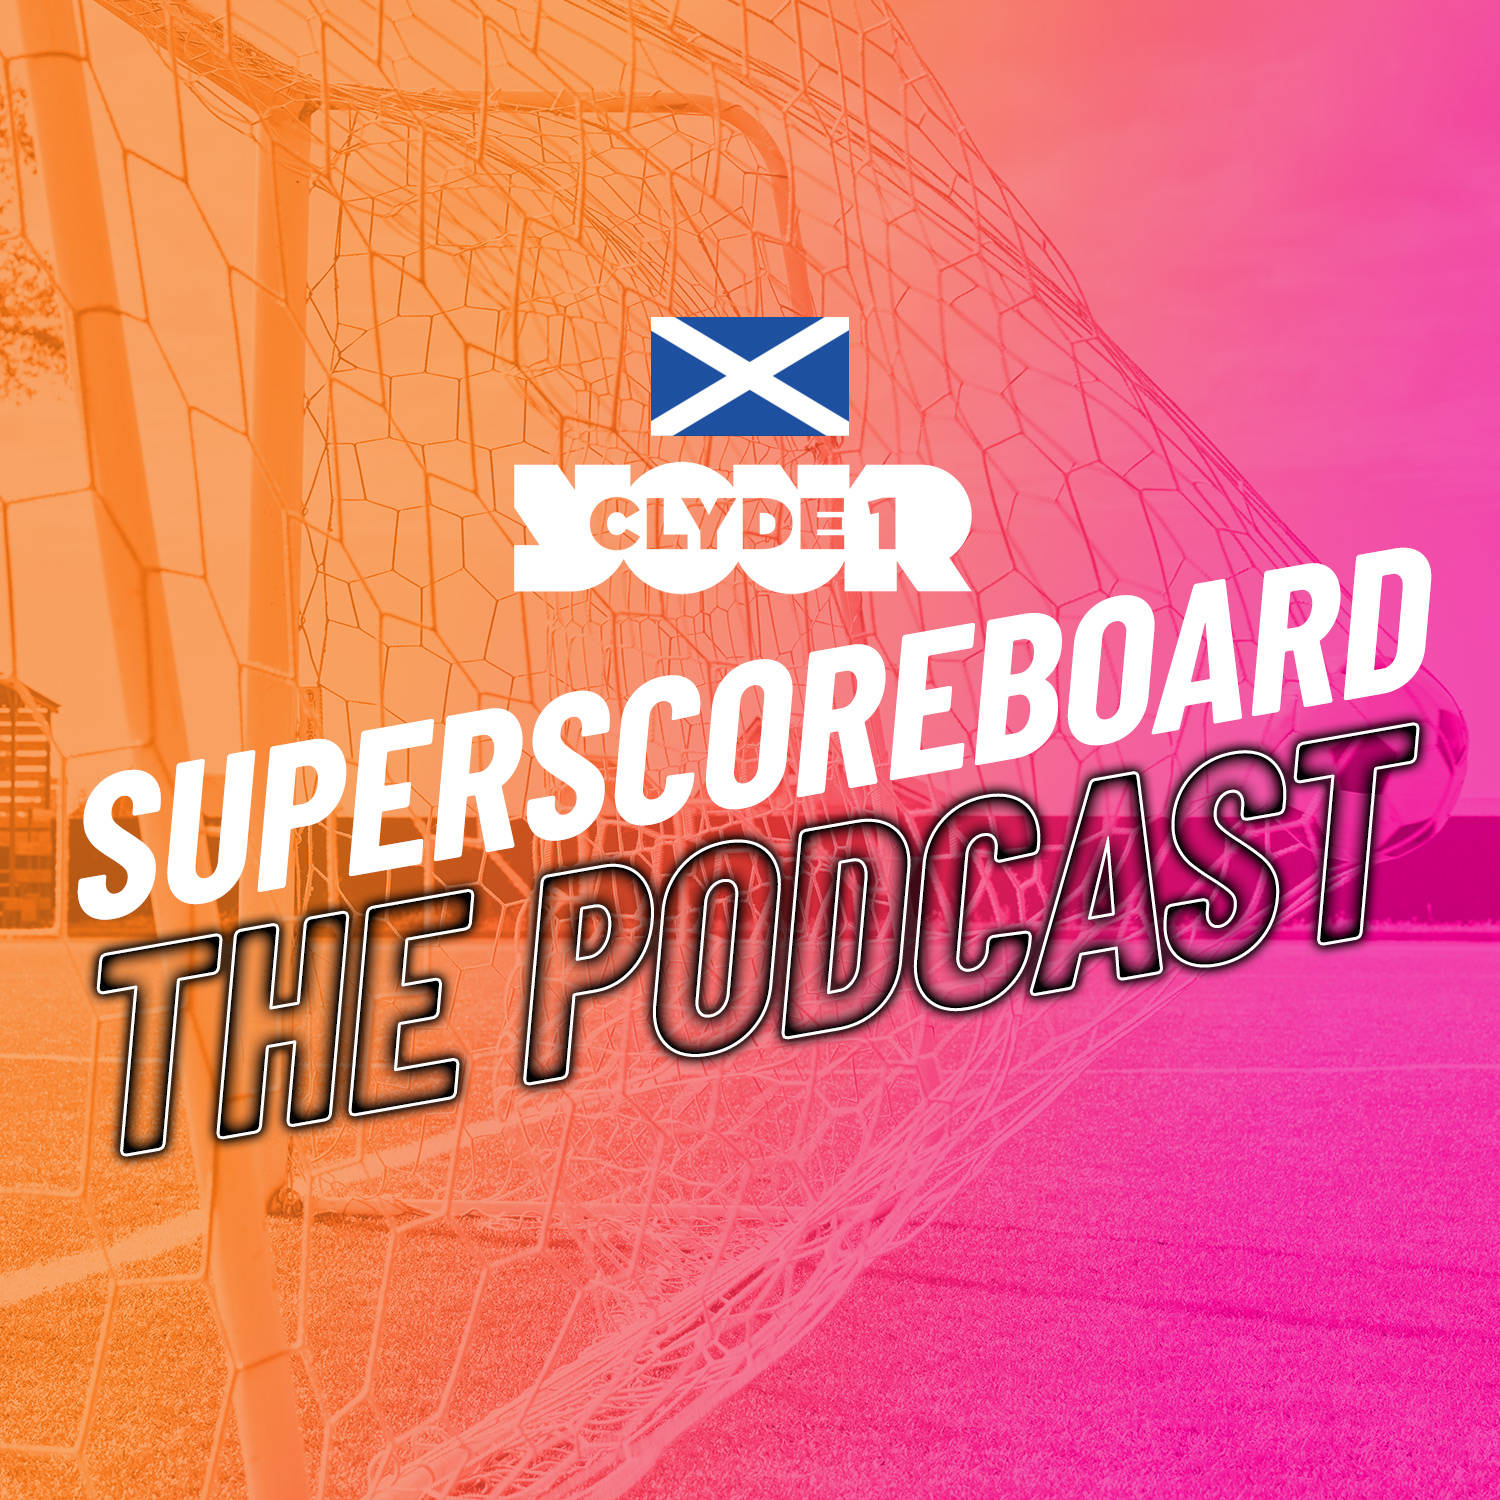 Saturday 30th March Clyde 1 Superscoreboard Part 1